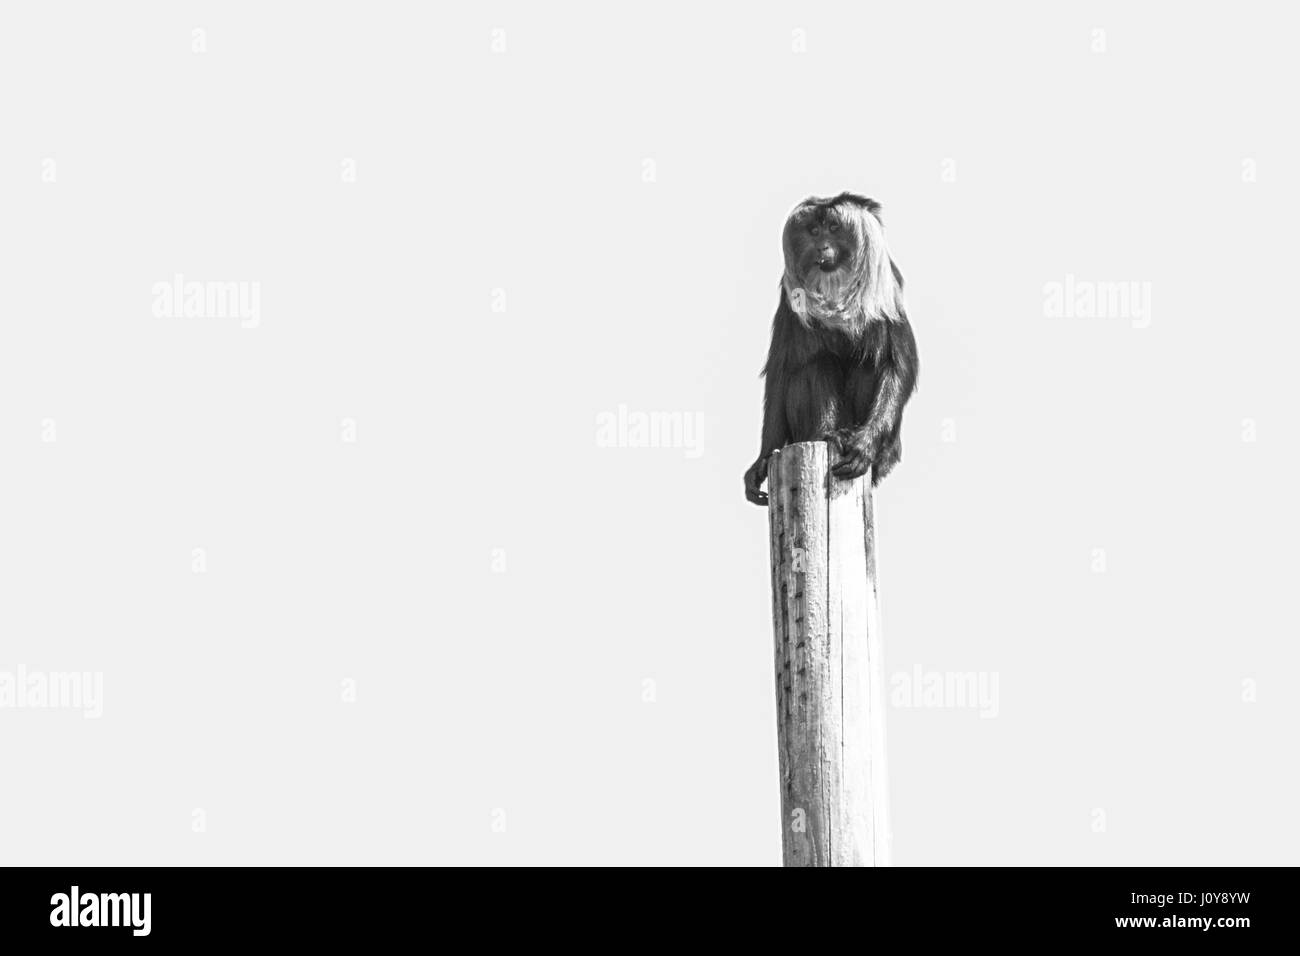 A Lion Tailed Macaque sitting on top of a tall pole Stock Photo